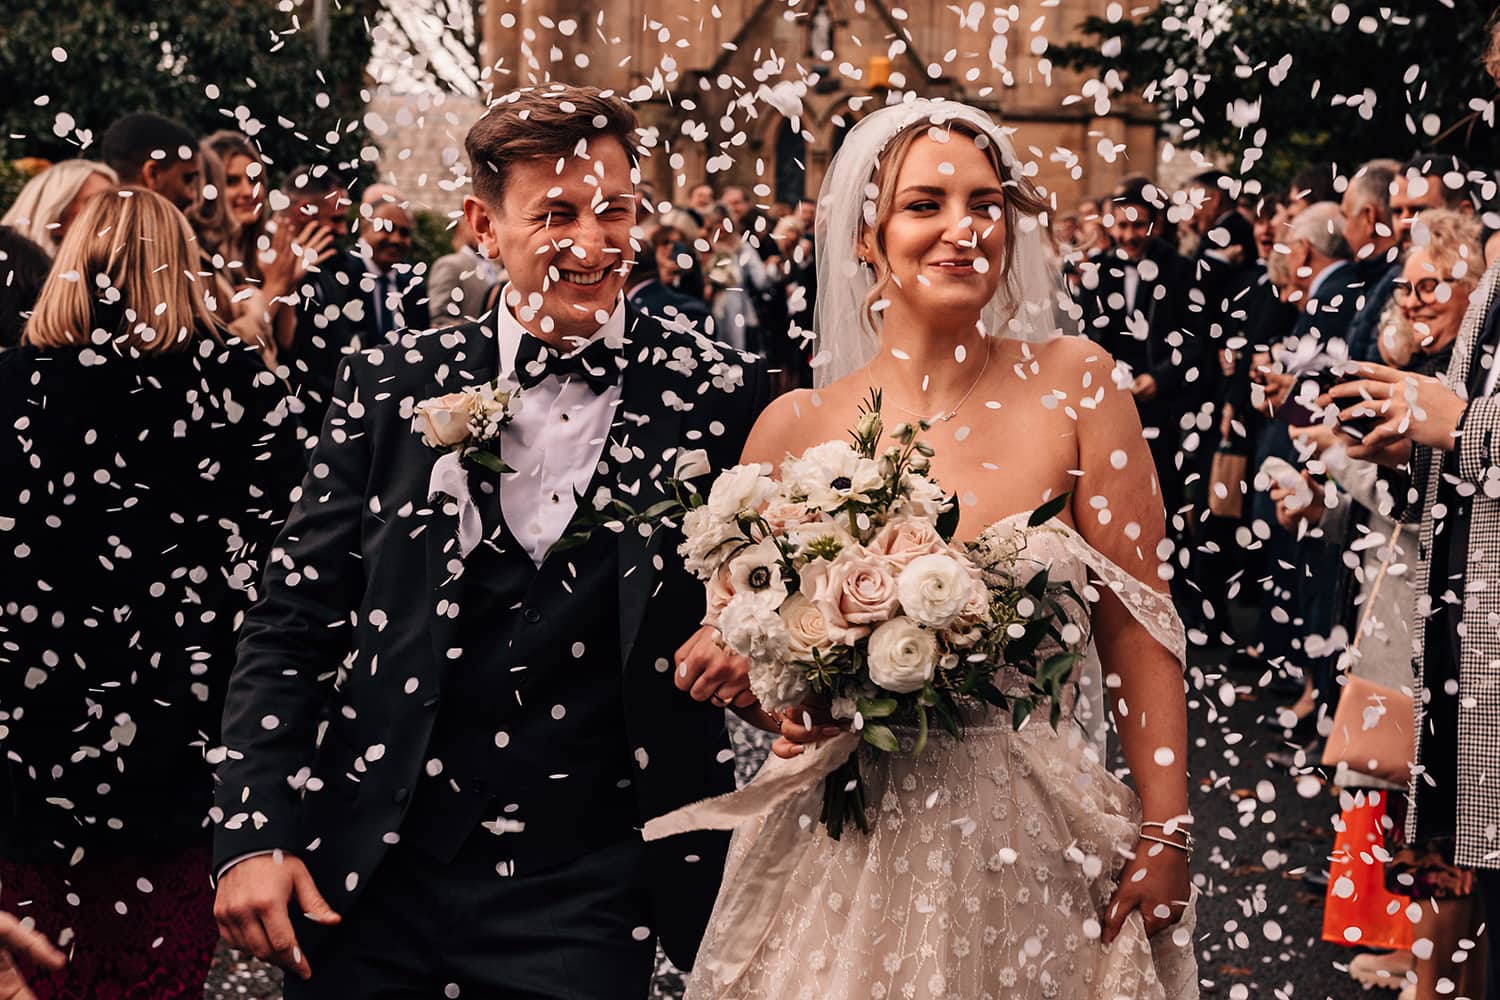 Bride and Groom walking toward the camera in a storm of confetti